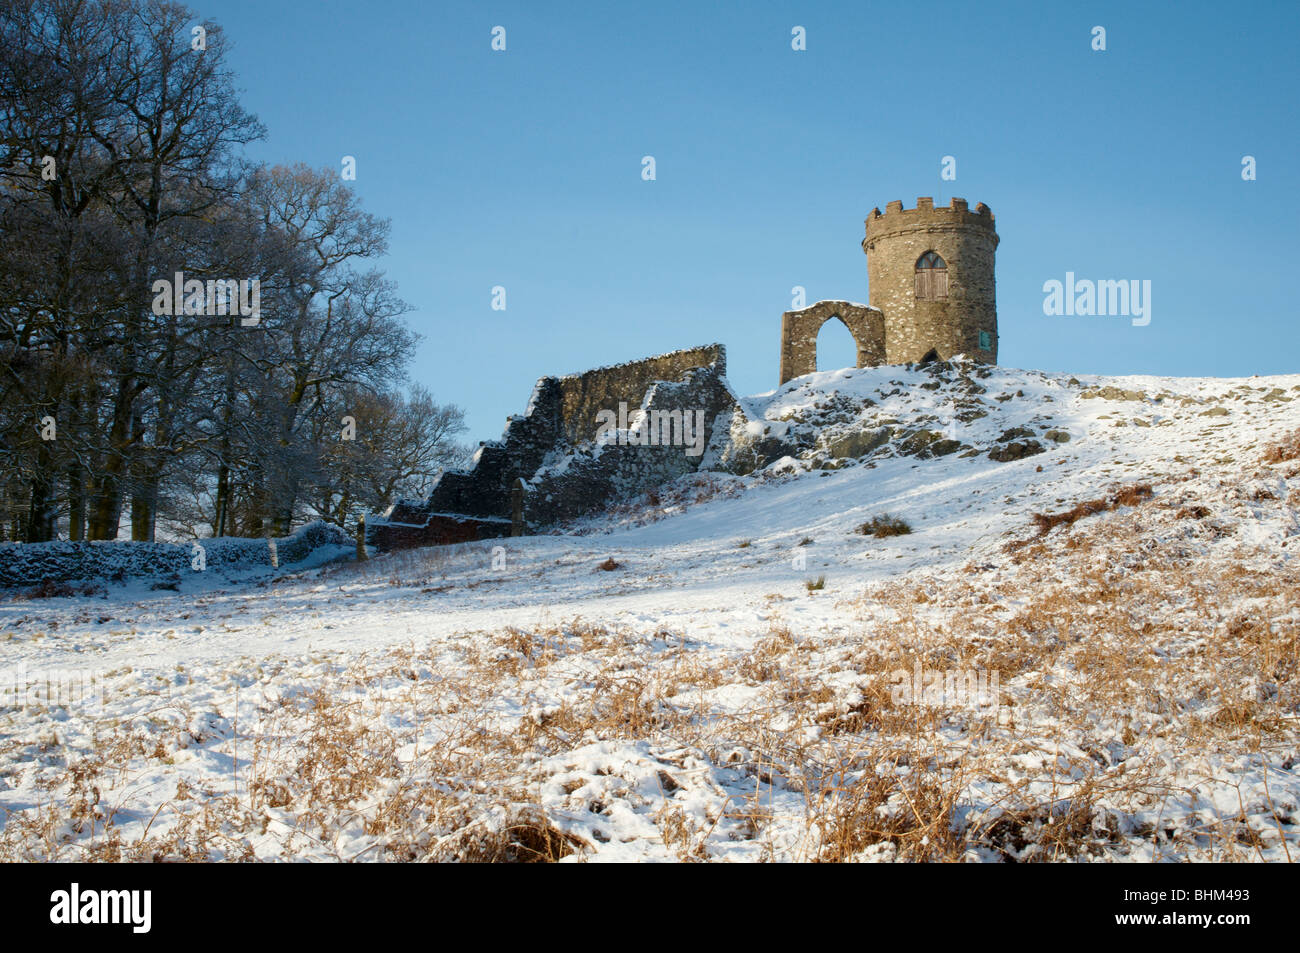 Snowy Winter Scene at Old John, Bradgate Park, Newtown Linford, Leicestershire. People having fun, sledging downhill. Stock Photo